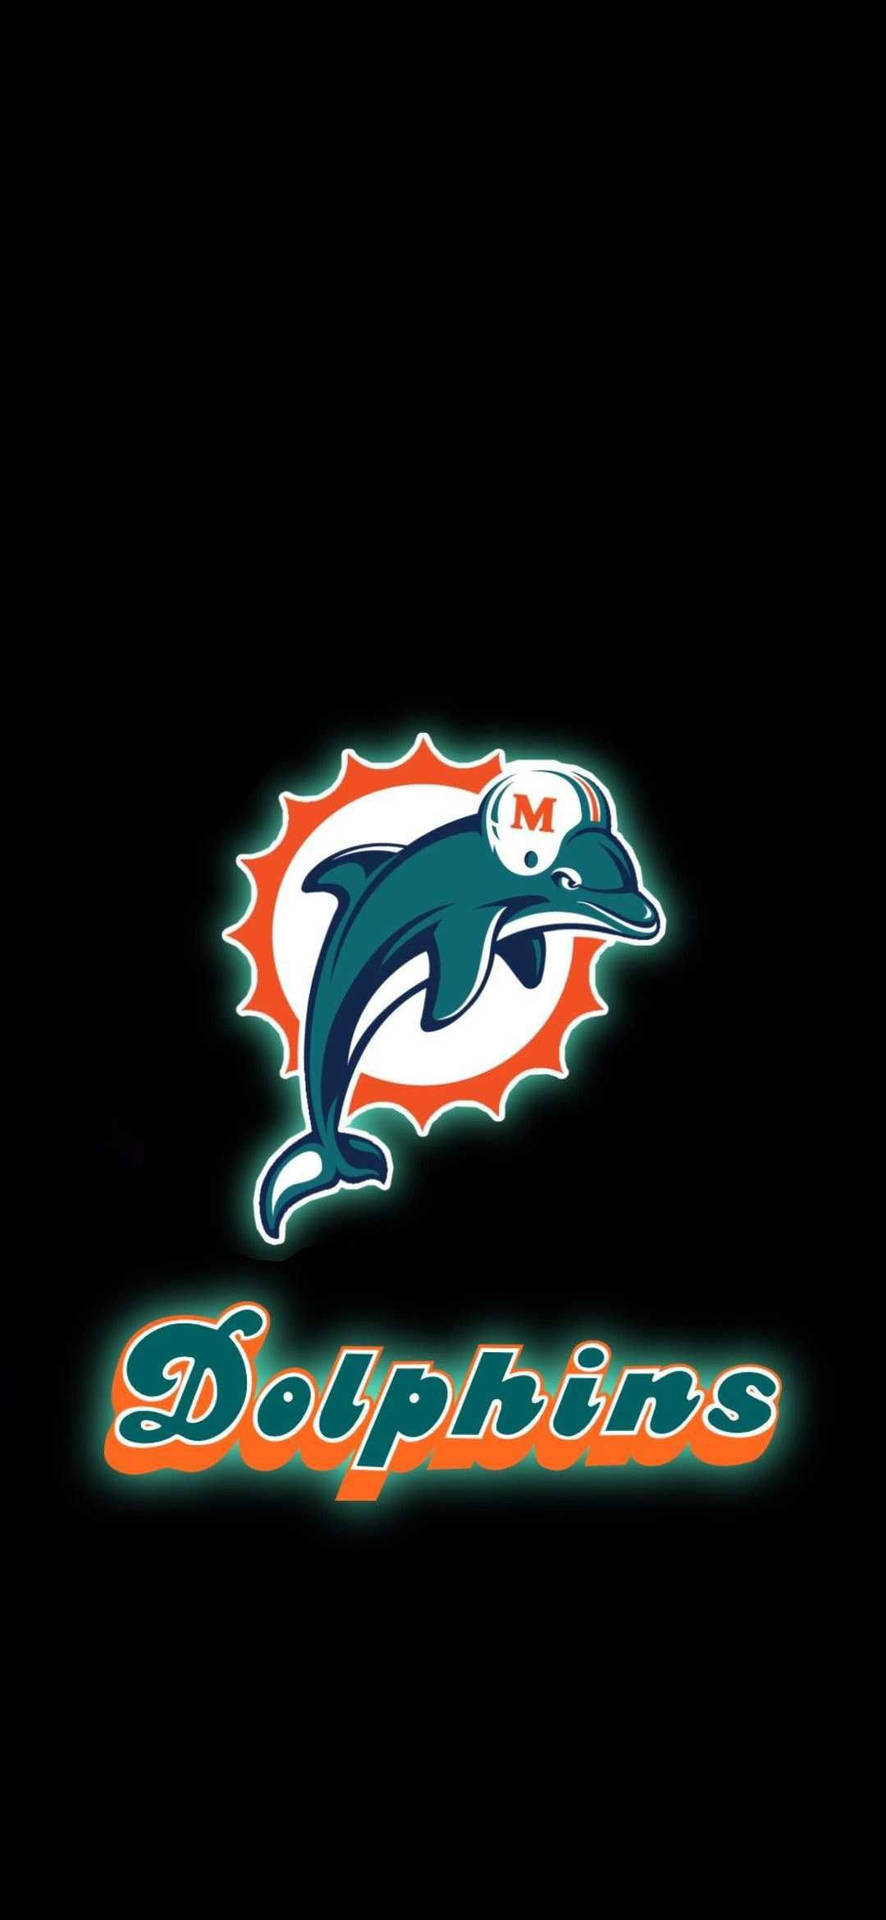 Rock your fandom and show support for the Miami Dolphins with this Miami Dolphins Iphone! Wallpaper